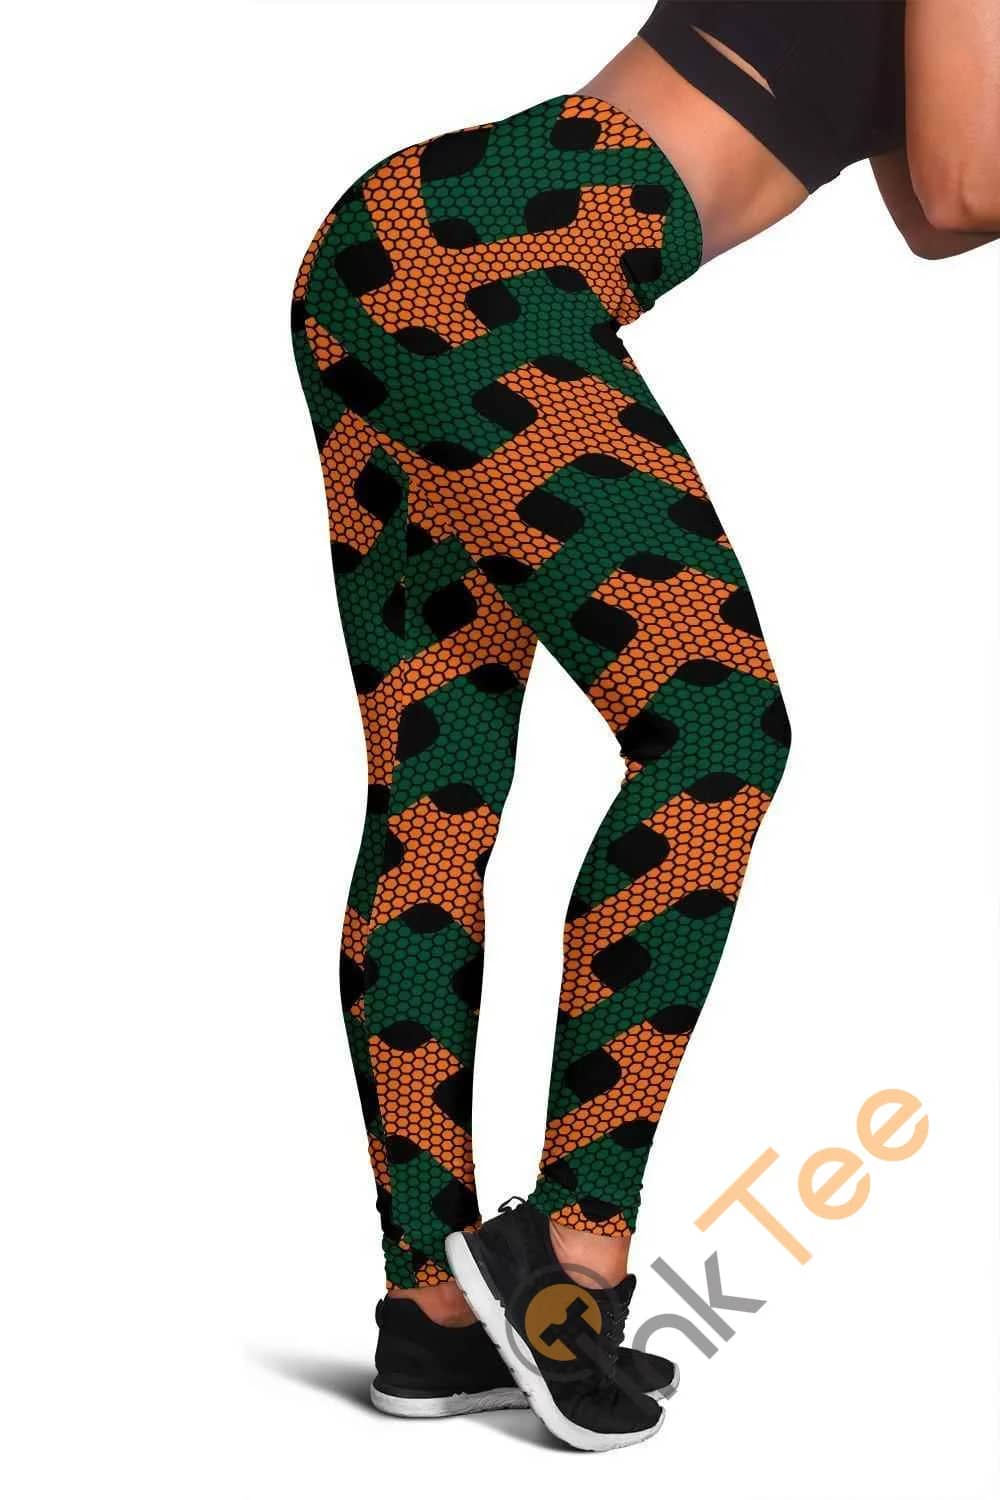 Miami Hurricanes Inspired Liberty Green 3D All Over Print For Yoga Fitness Fashion Women's Leggings